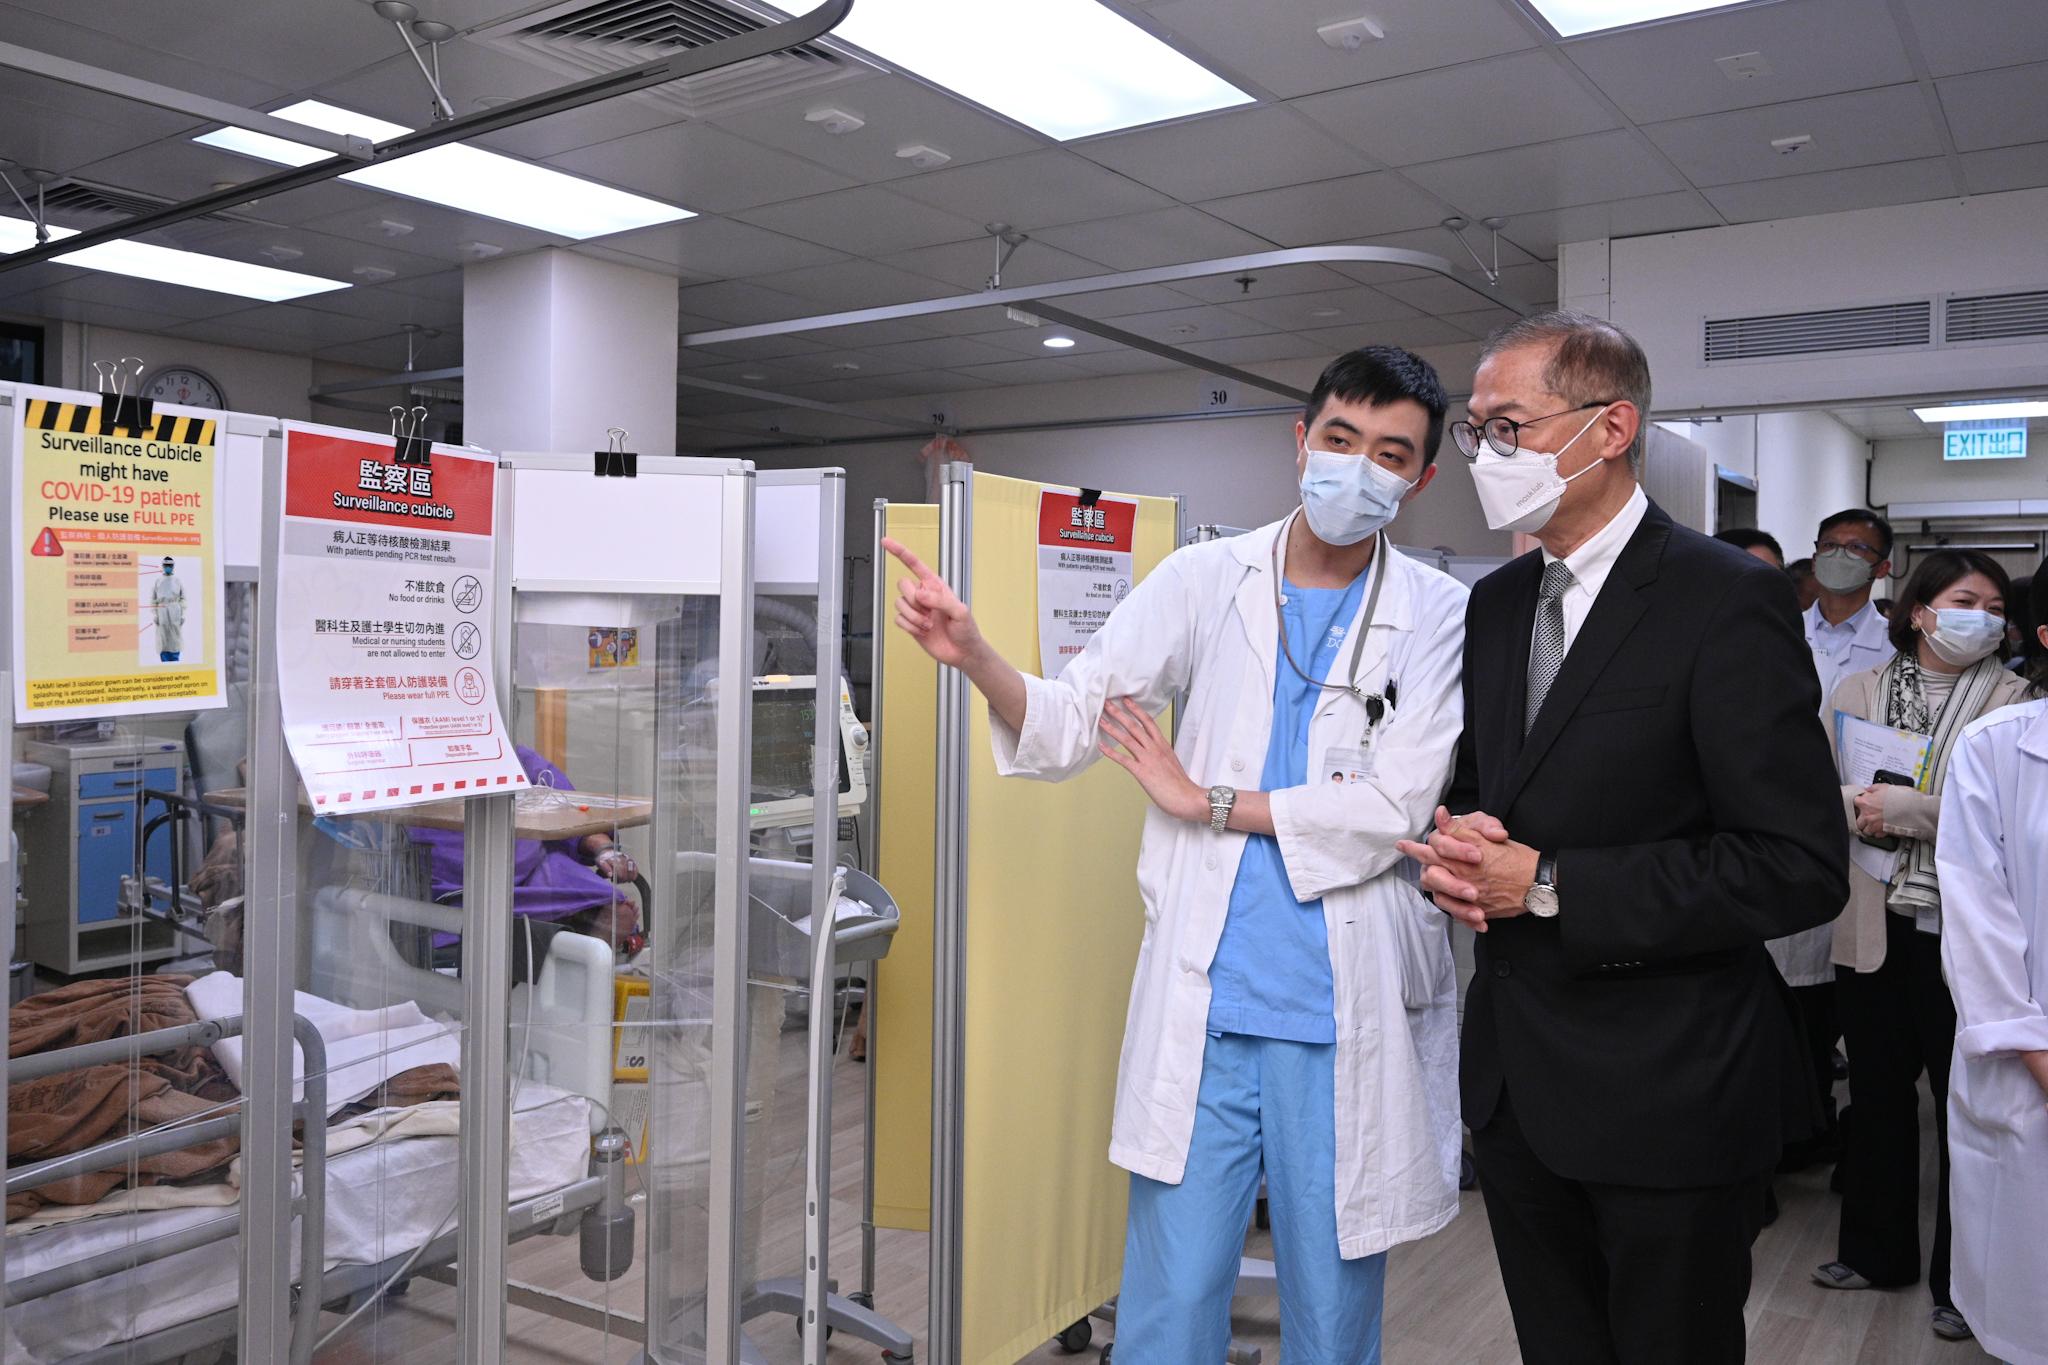 The Secretary for Health, Professor Lo Chung-mau, visited Queen Mary Hospital today (January 13). Photo shows Professor Lo (right) visiting the medicine cohort cubicle of the hospital.
